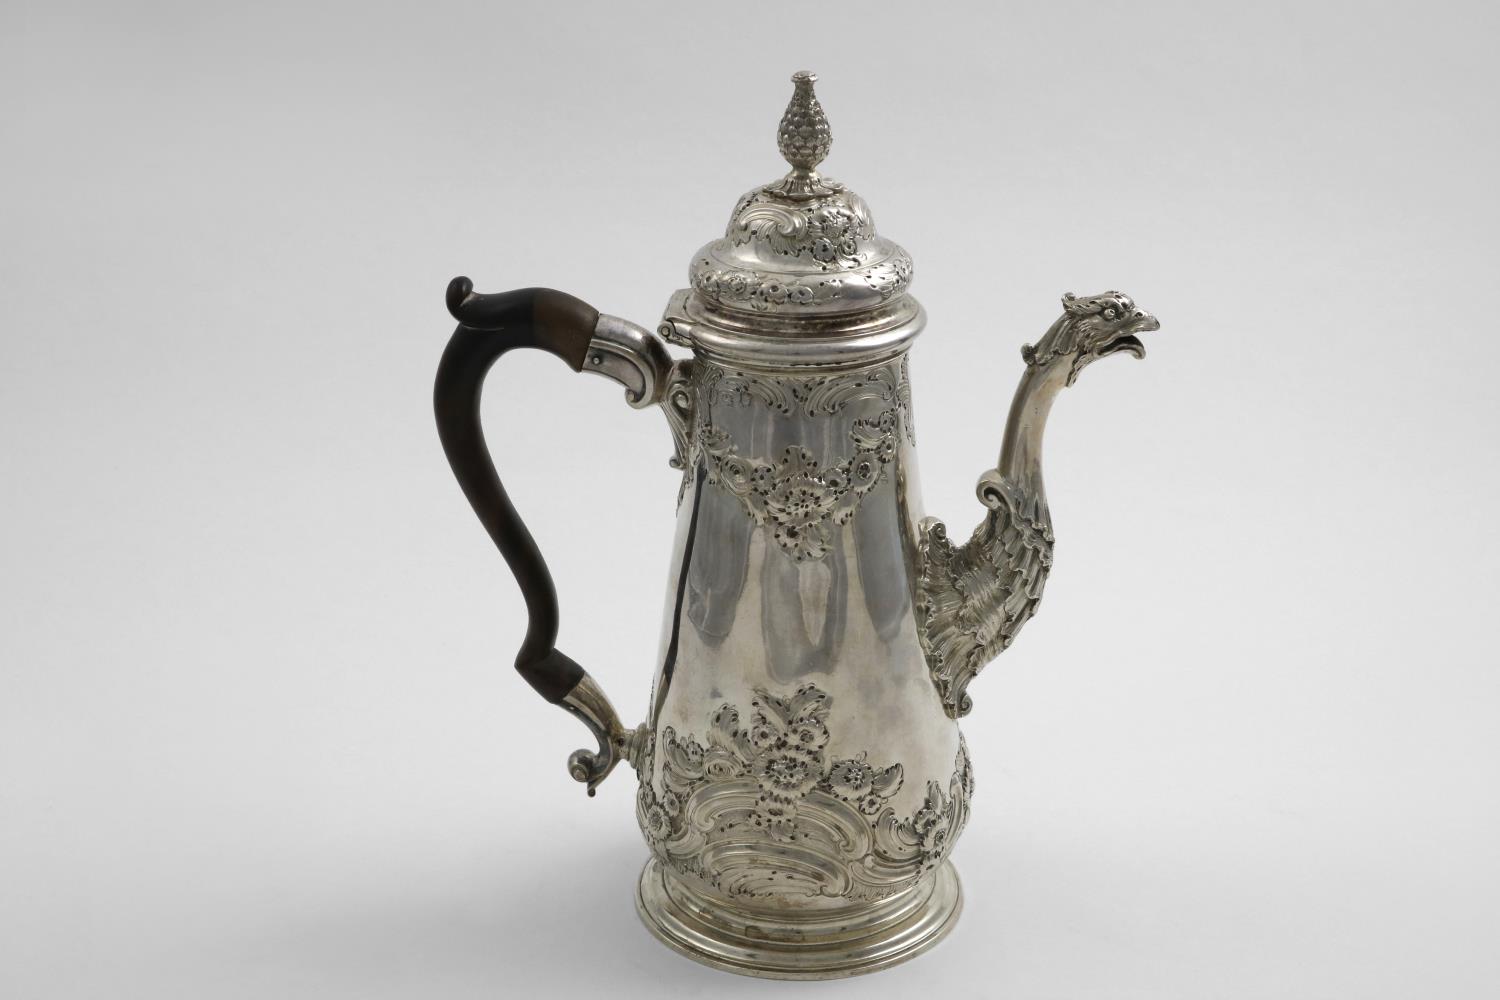 A GEORGE II COFFEE POT with a tapering body, a tucked-in base and spreading circular foot, decorated